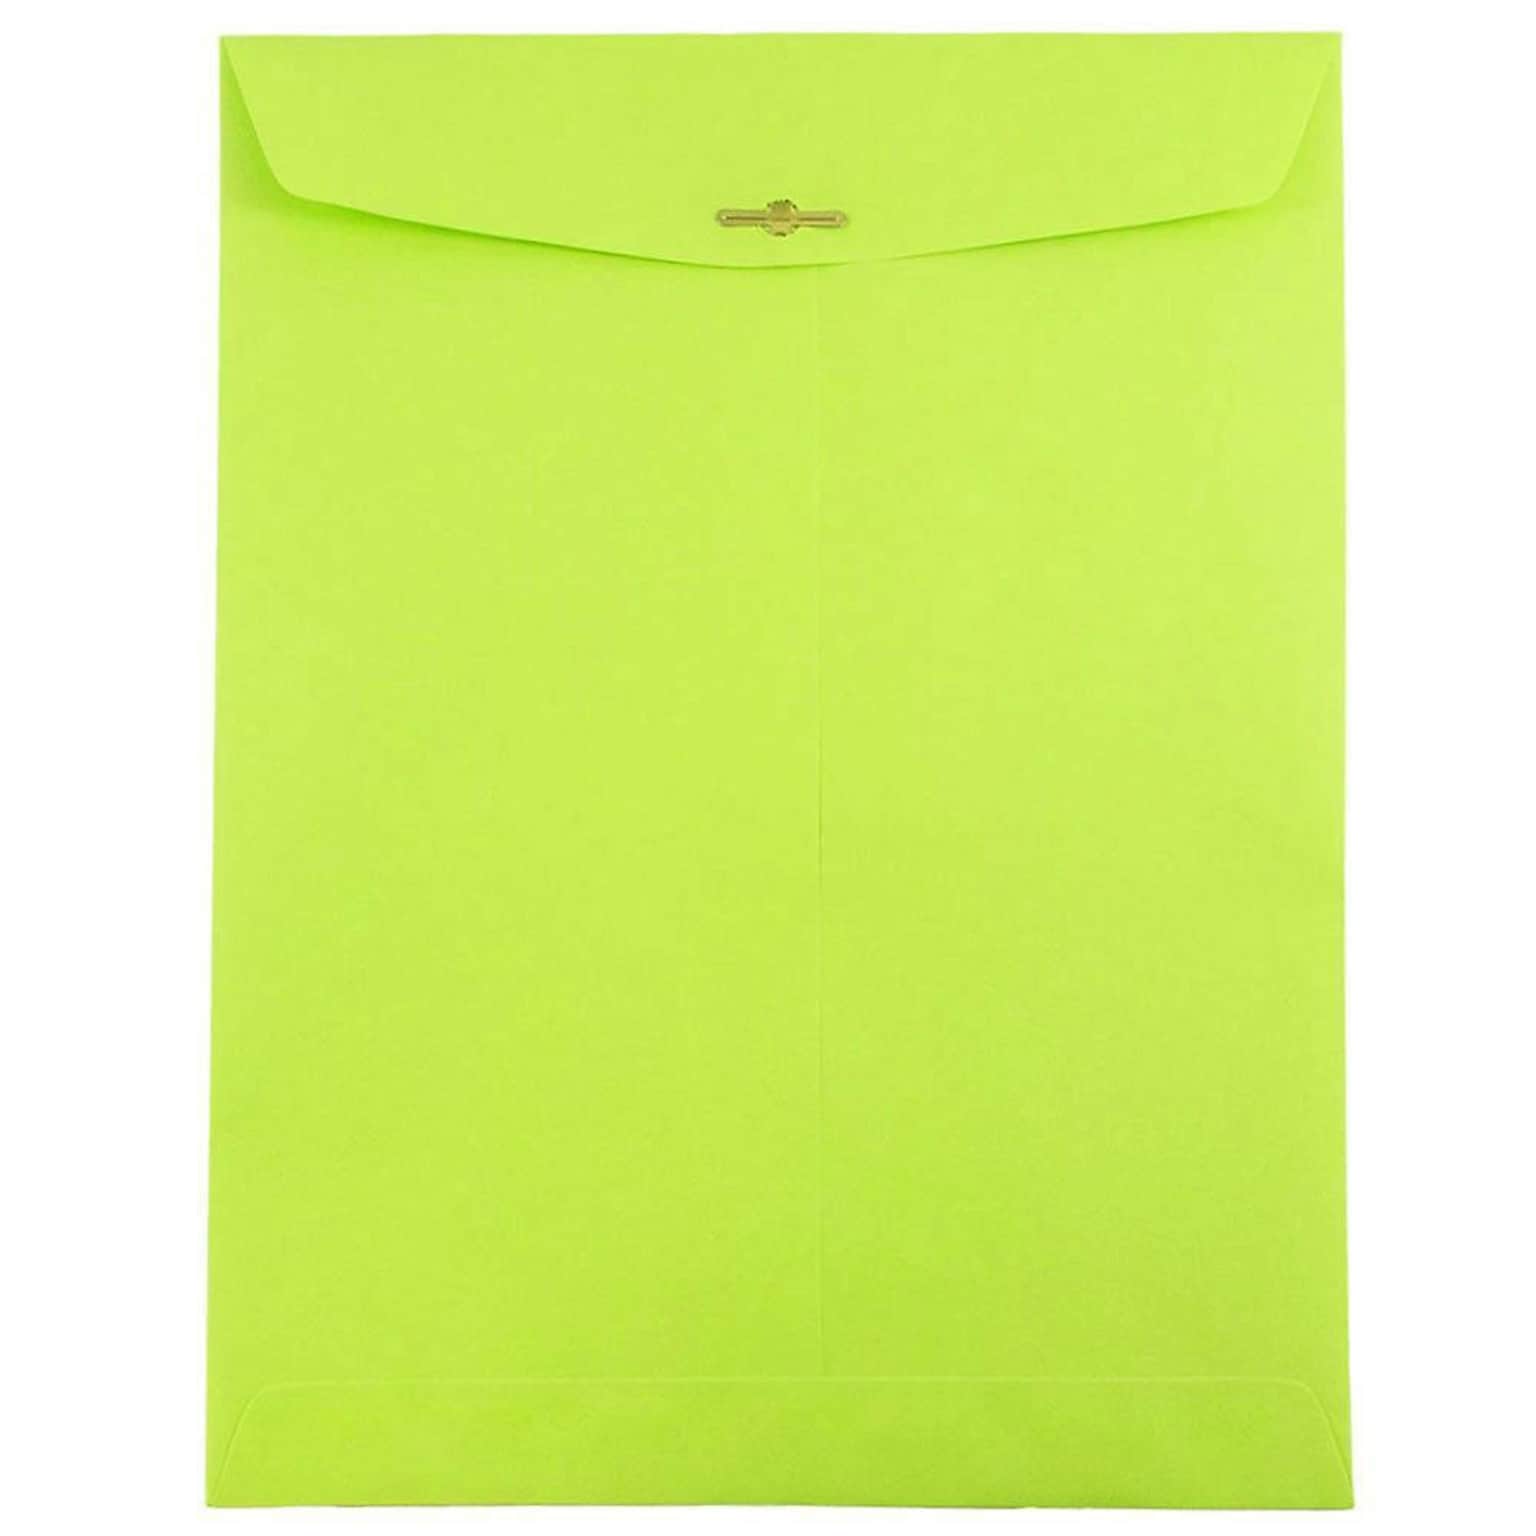 JAM Paper 9 x 12 Open End Catalog Colored Envelopes with Clasp Closure, Ultra Lime Green, 10/Pack (900835395B)